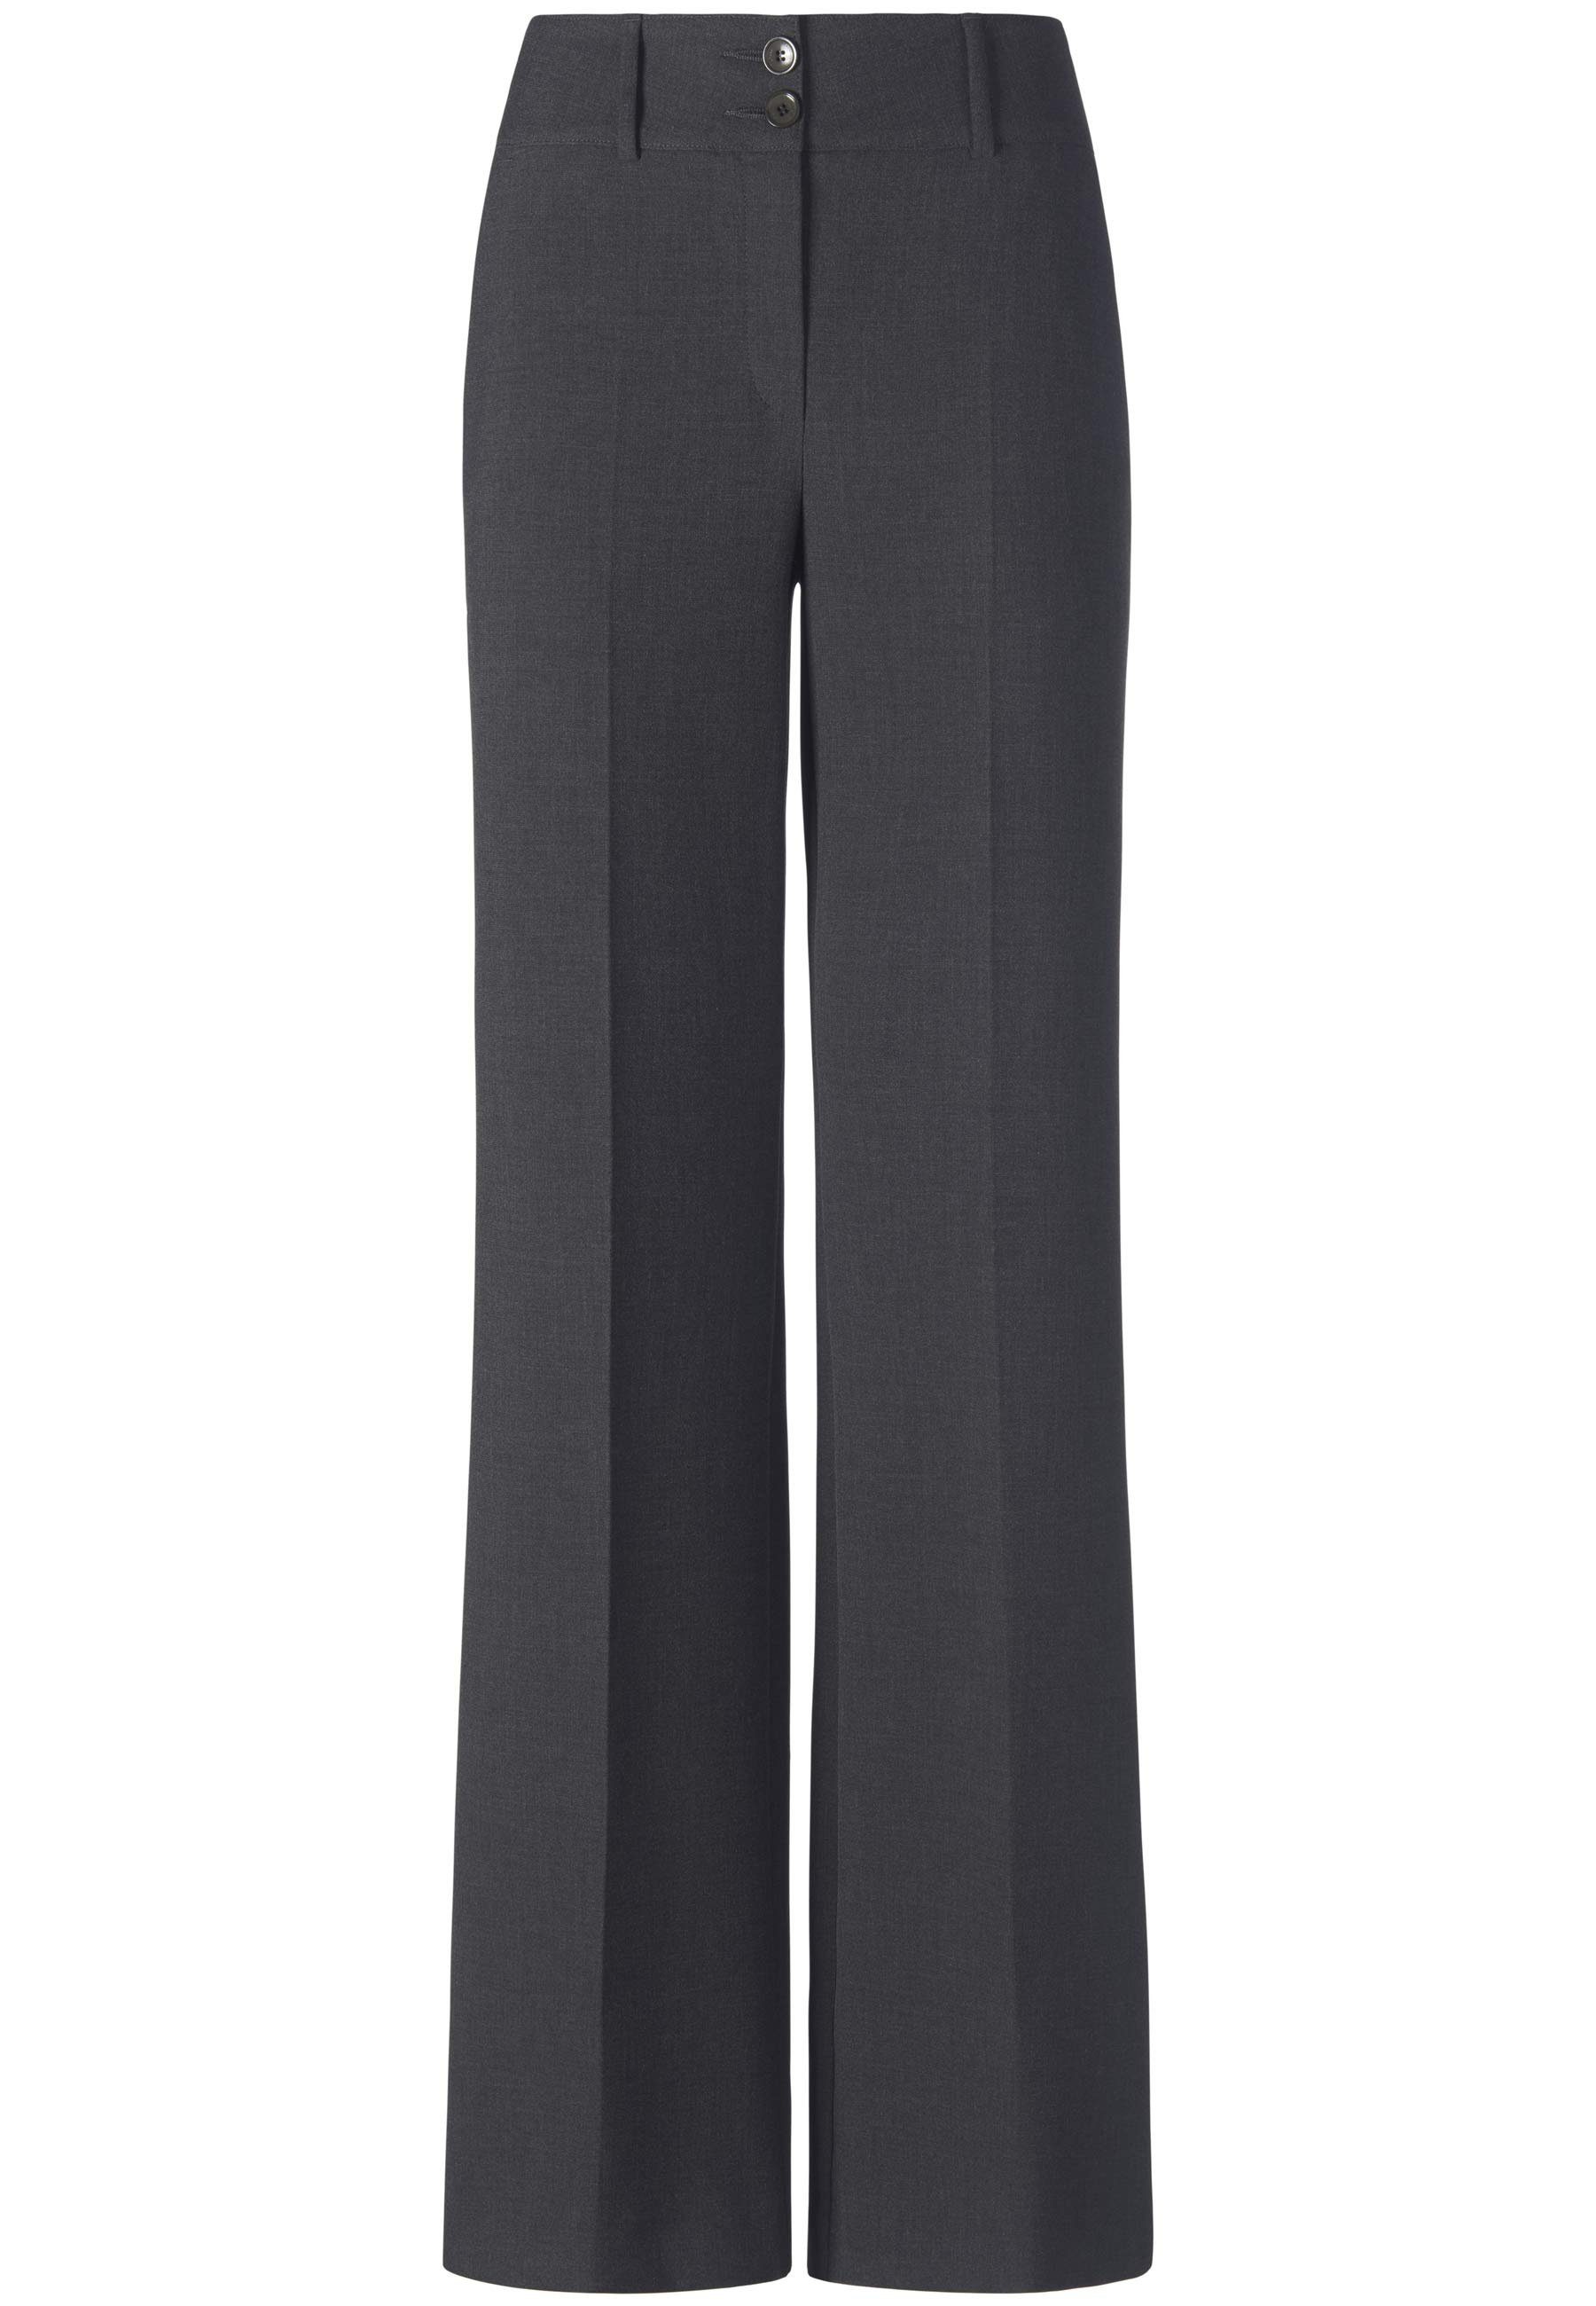 Berlin ANTHRACITE-MELANGE Fadenmeister Stoffhose Trousers